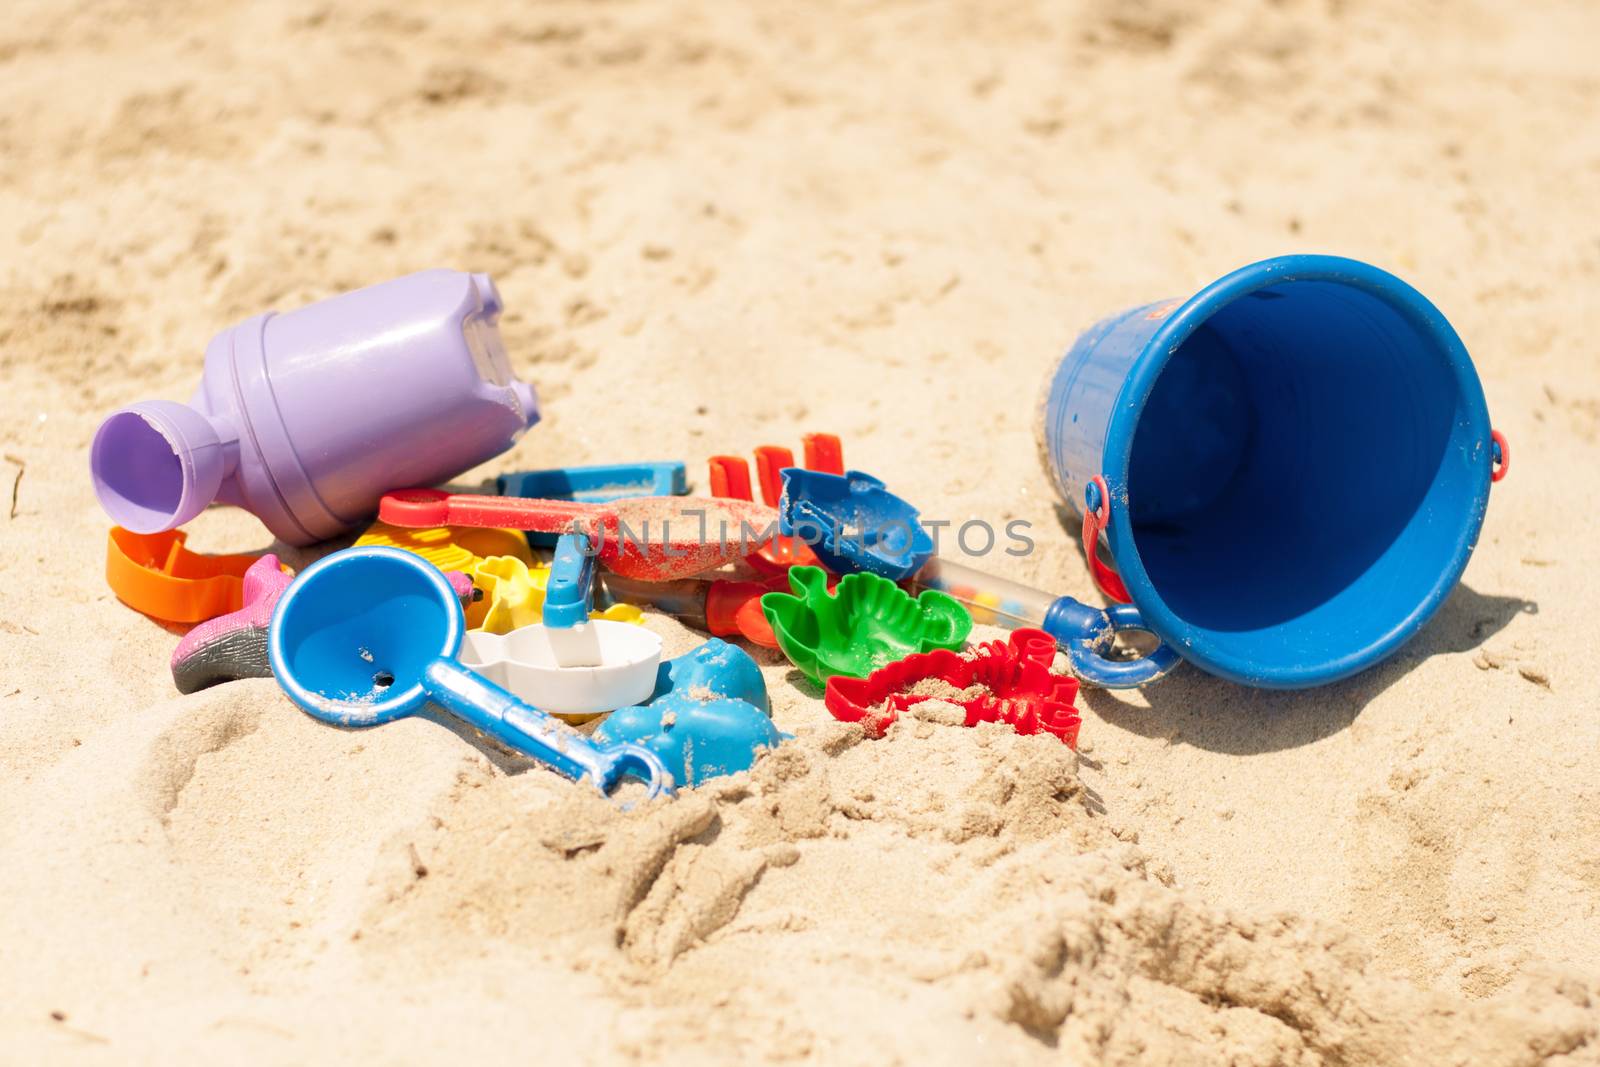 Many plastic toys in the golden sand